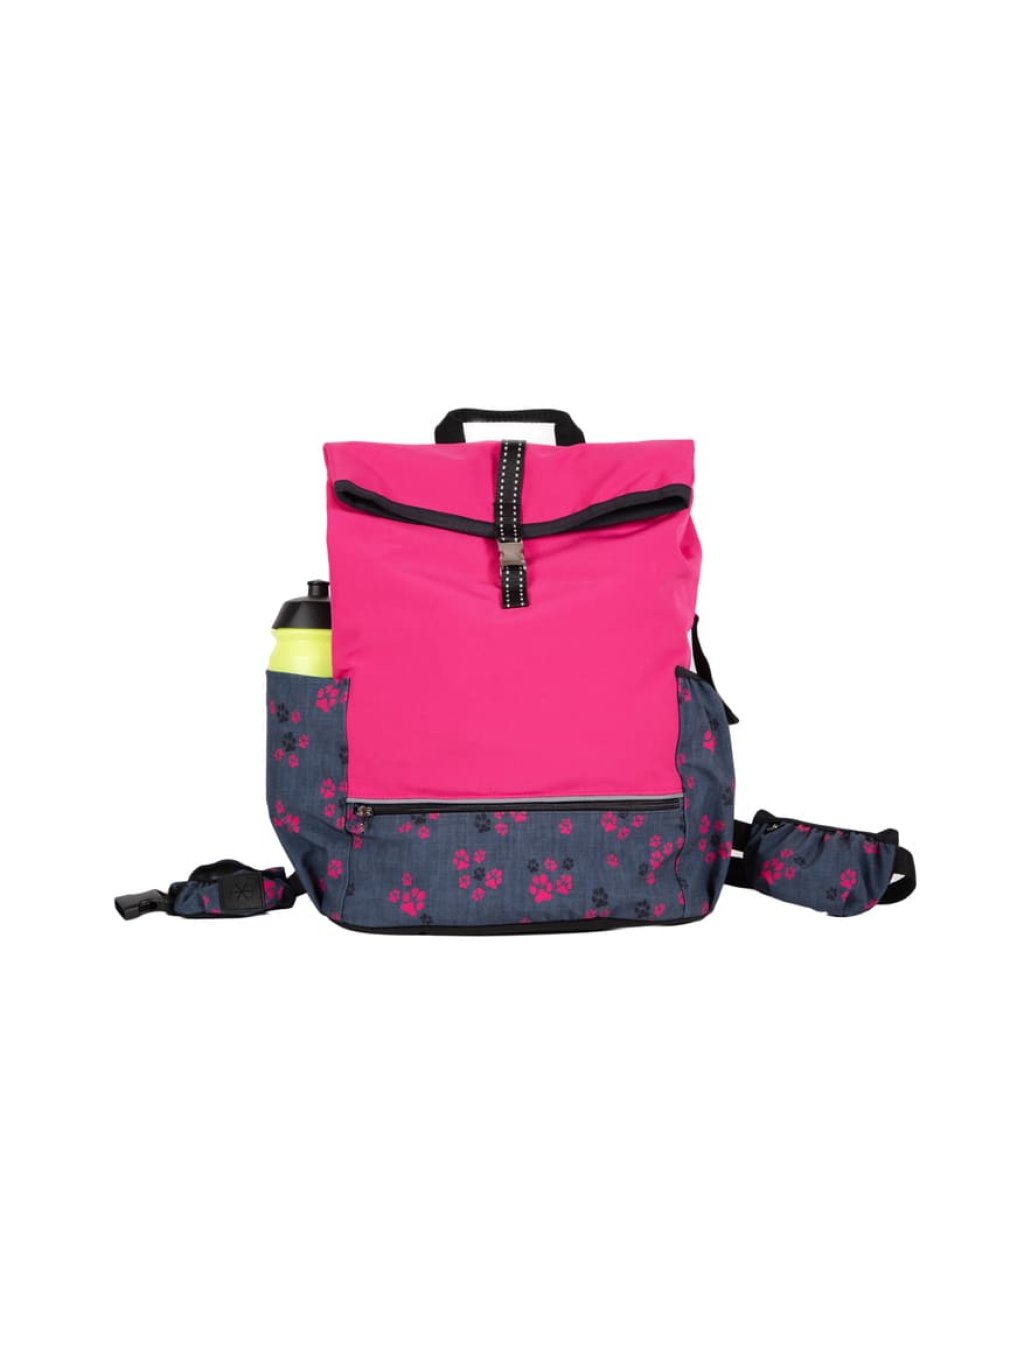 Training backpack PINK